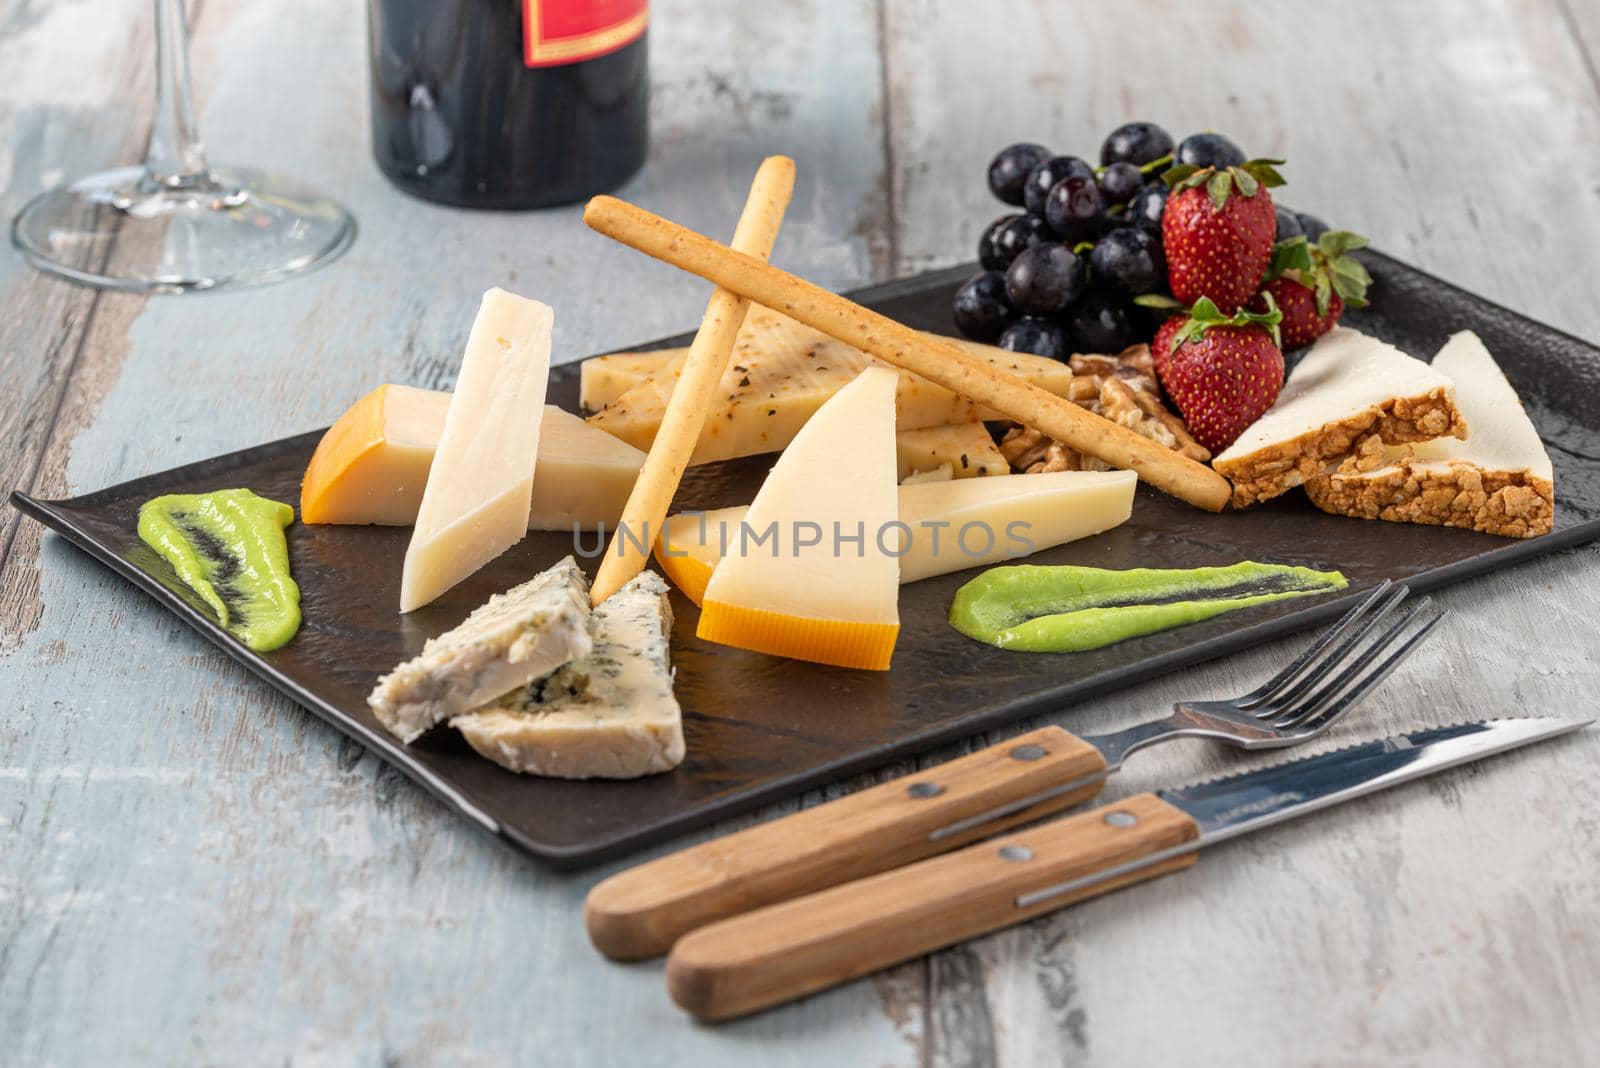 Gourmet cheese plate by Sonat